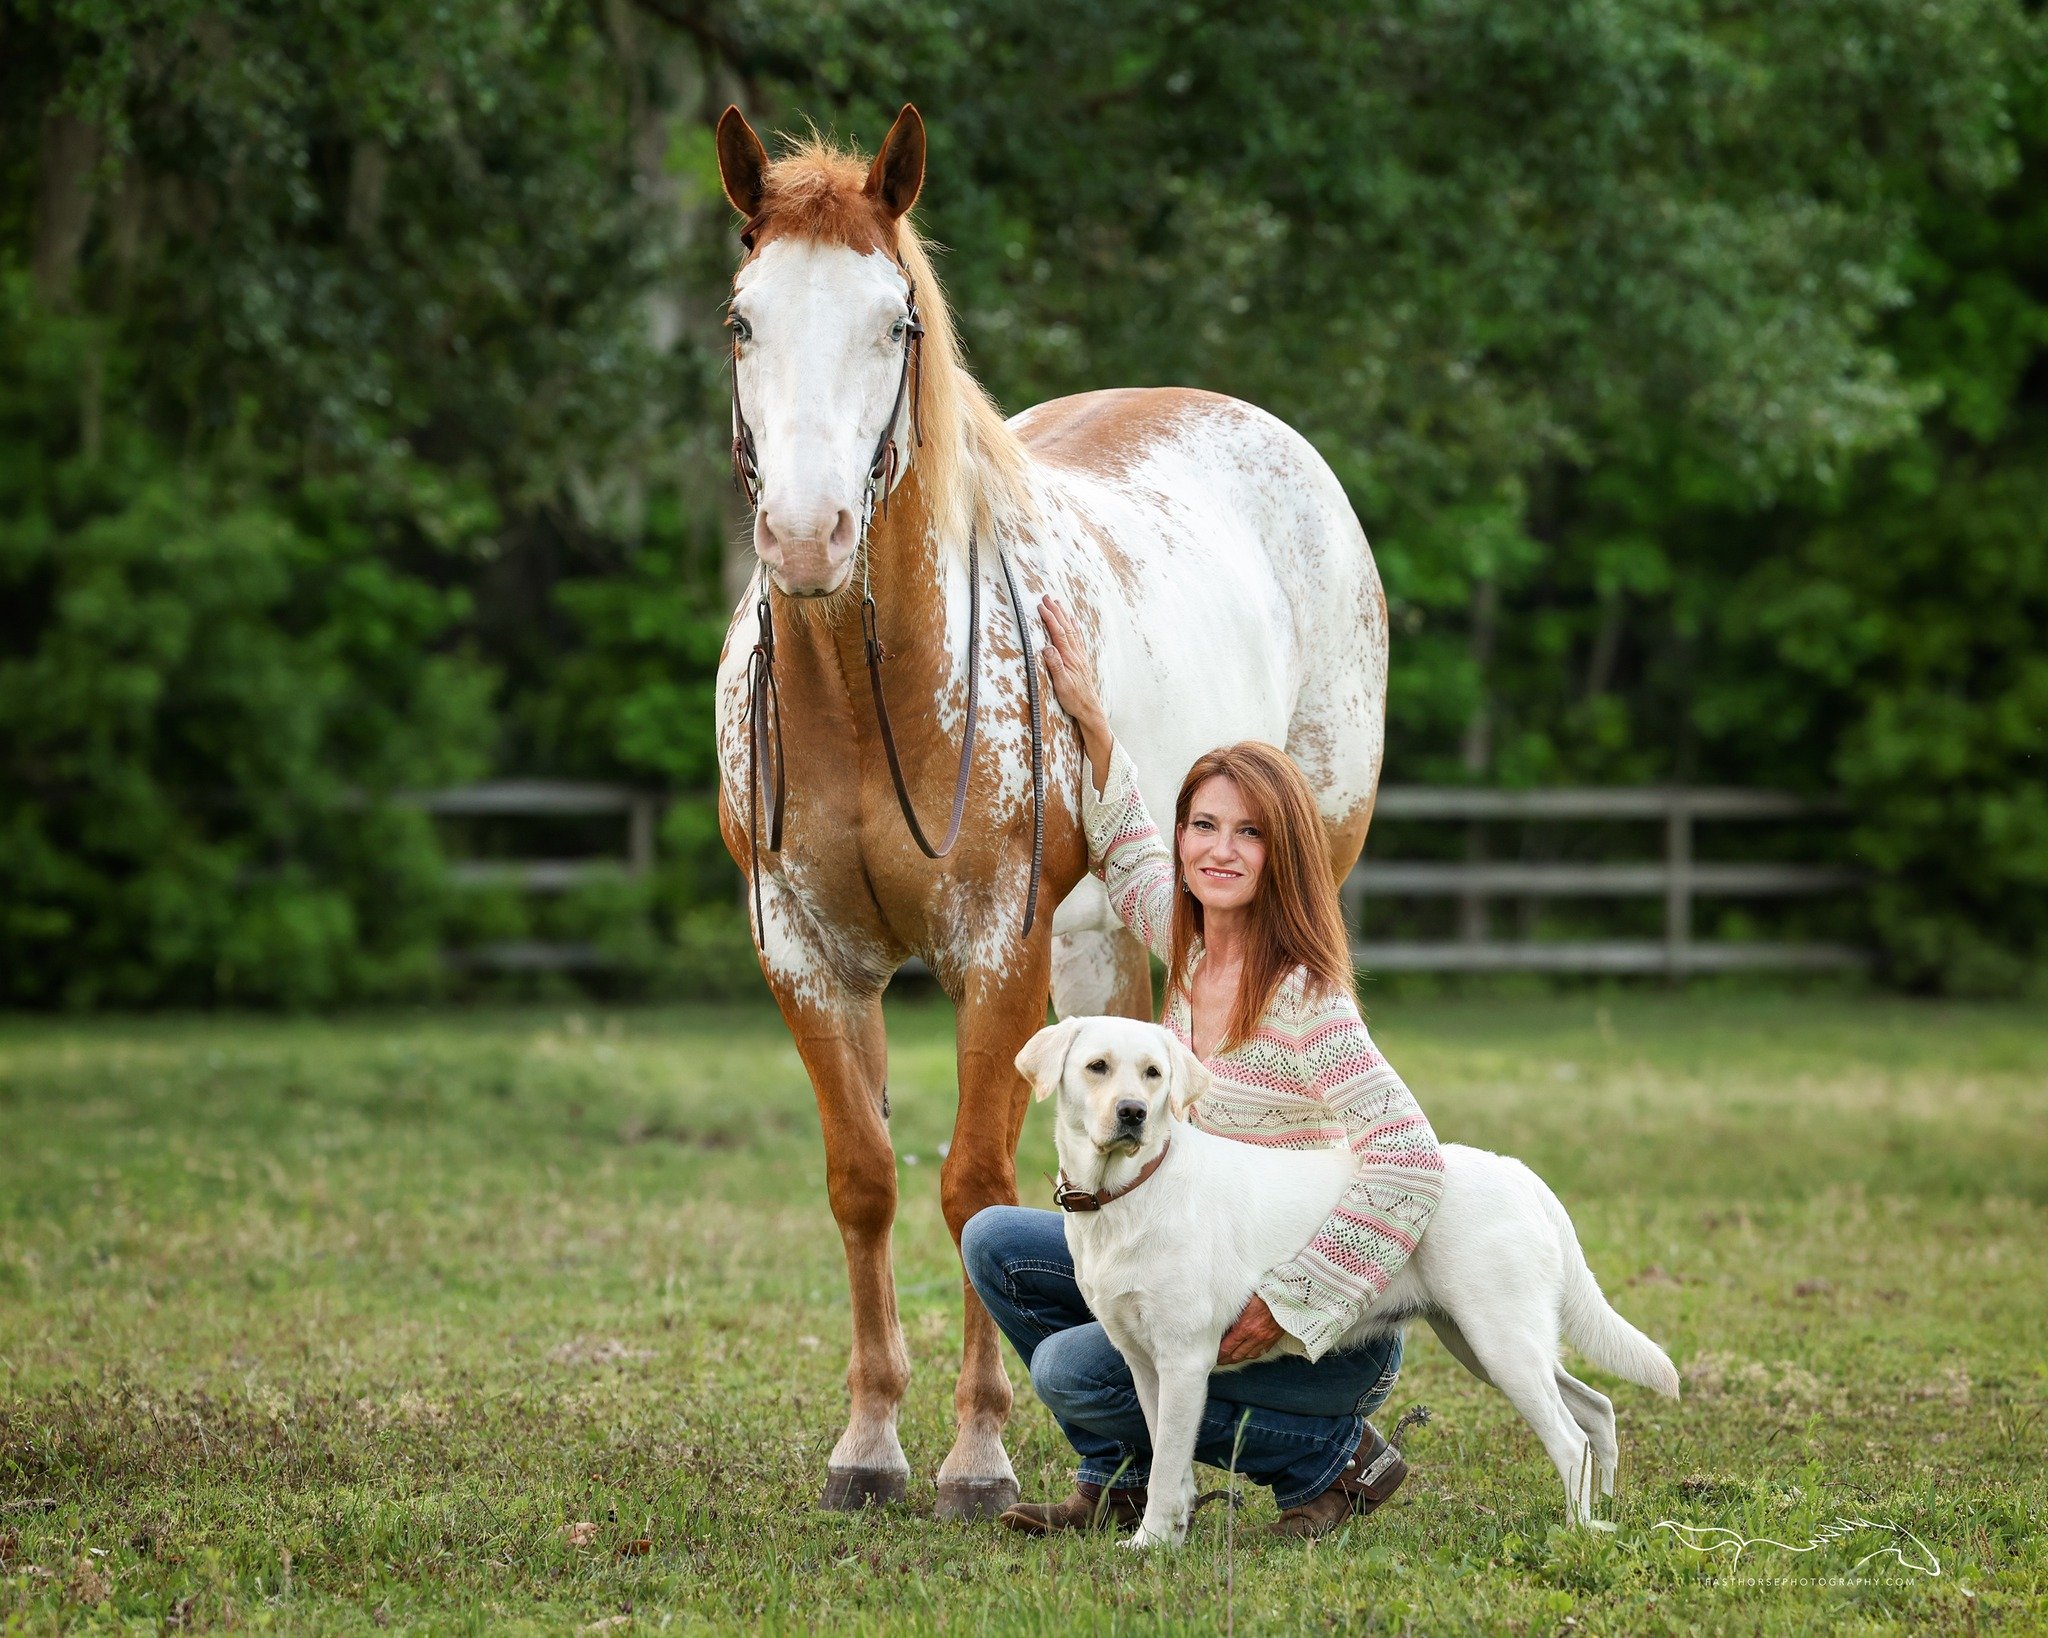 The Equine Photography Essentials workshop with Cowgirls with Cameras is well underway, and we have a great group of photographers joining us and it is so fun to get to share a little bit of &quot;home&quot; with them! We are traveling all over the S